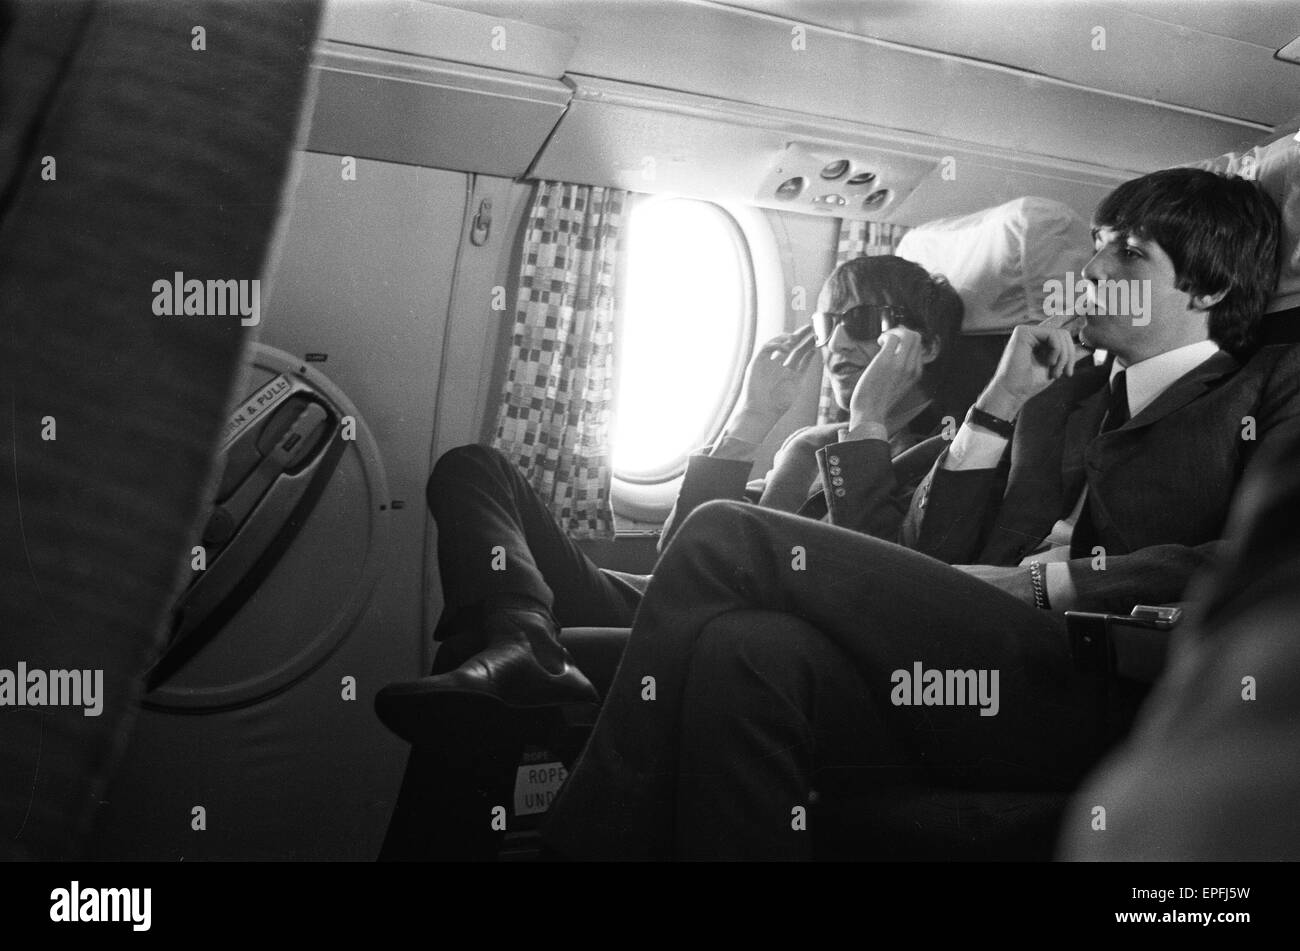 The Beatles in Liverpool for the Premier of a Hard Day's Night. Paul McCartney and Ringo Starr pictured here on the plane on the journey to Liverpool. 10th July 1964. Stock Photo